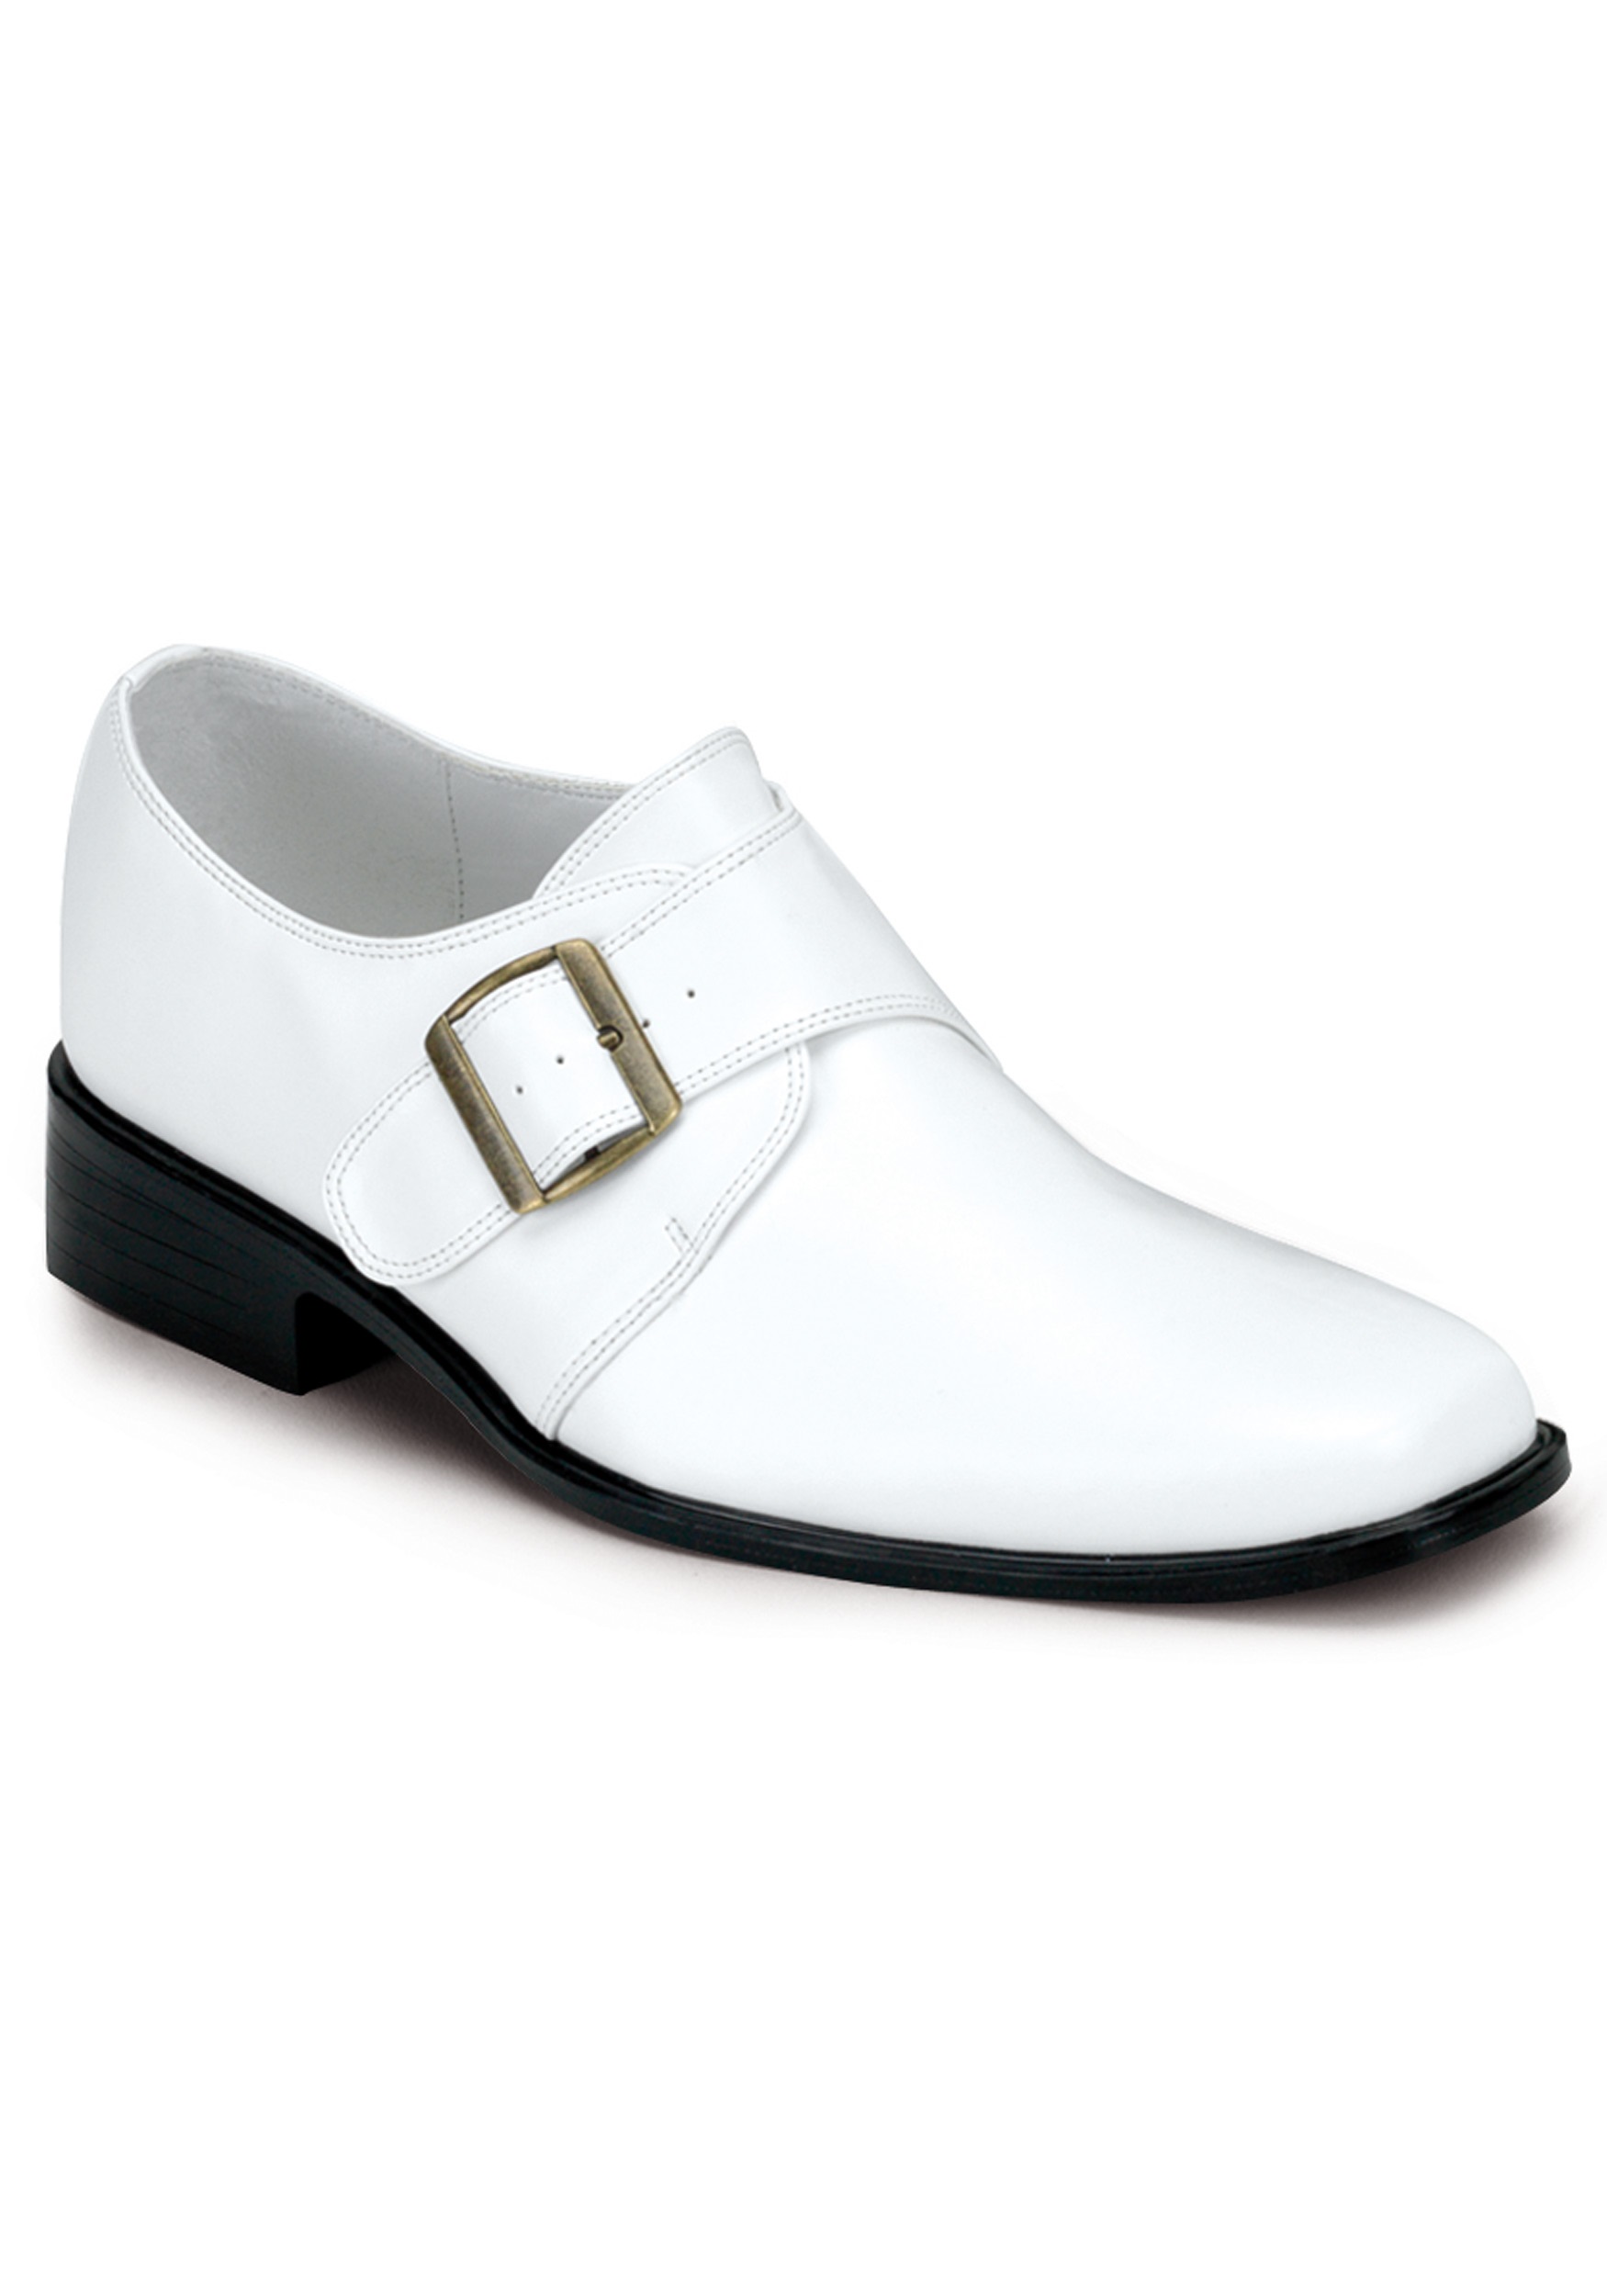 Pleasers USA, Inc. Mens Disco Loafers